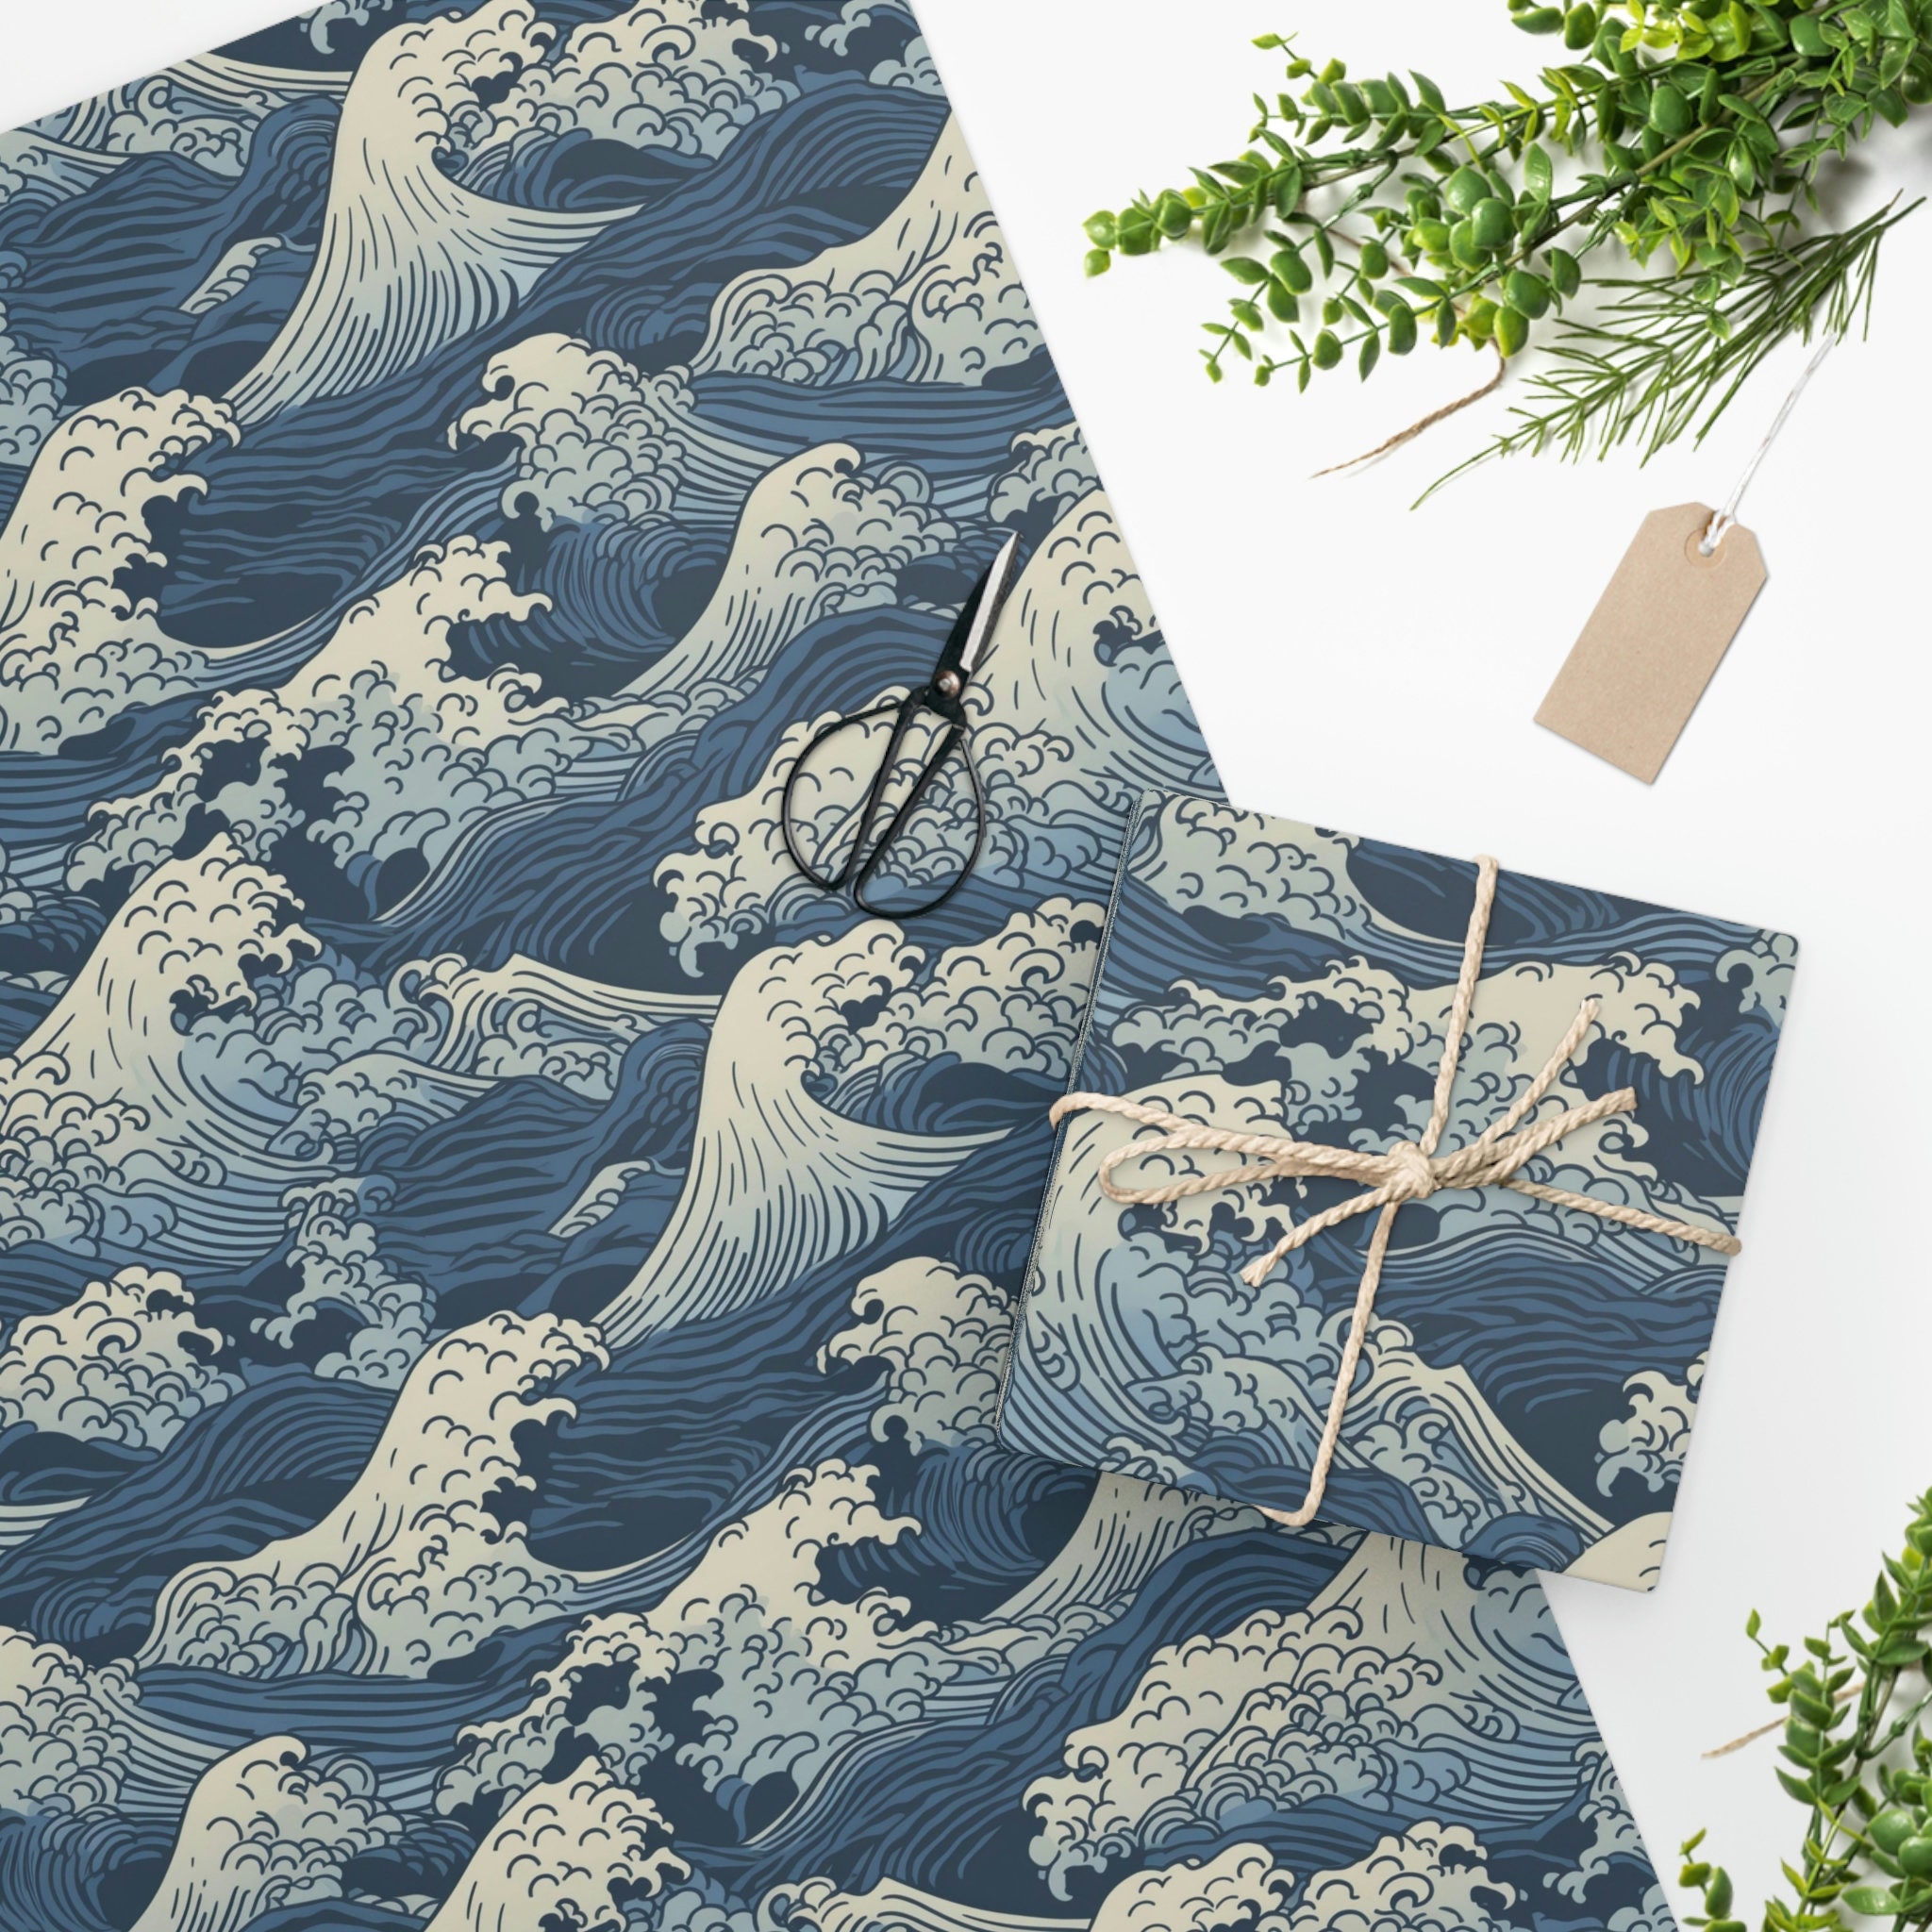 Japanese Wrapping Paper Graphic by fromporto · Creative Fabrica